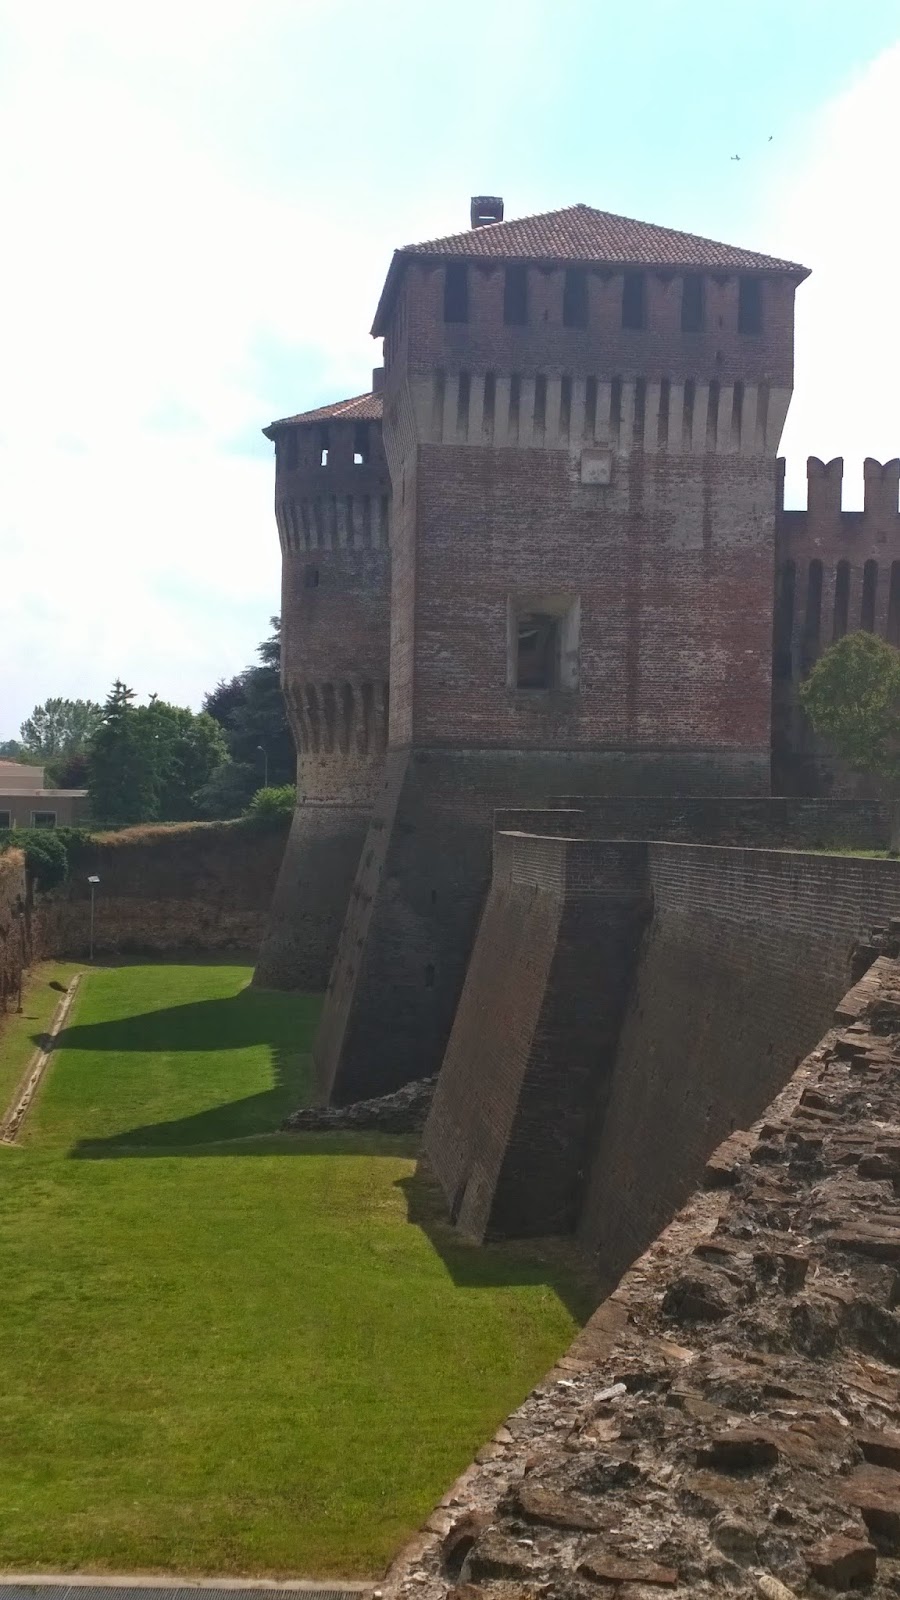 Castle at Soncino, Lombardy, Italy